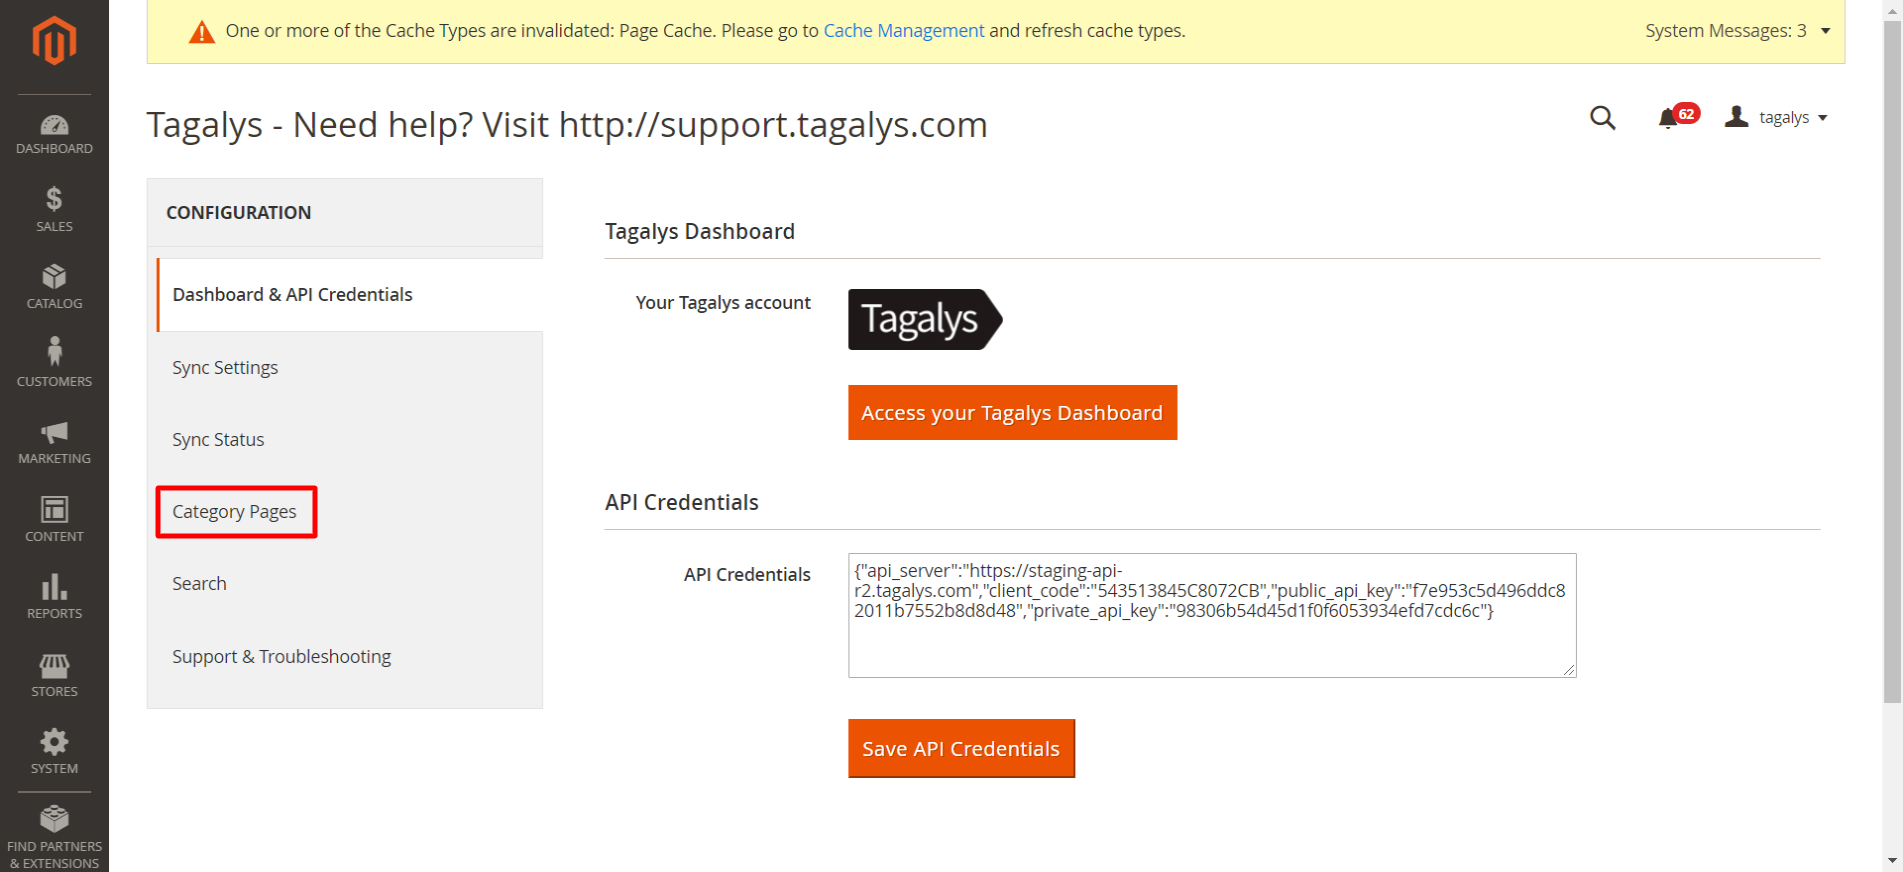 Enable all existing or future categories for merchandising on Tagslys. 